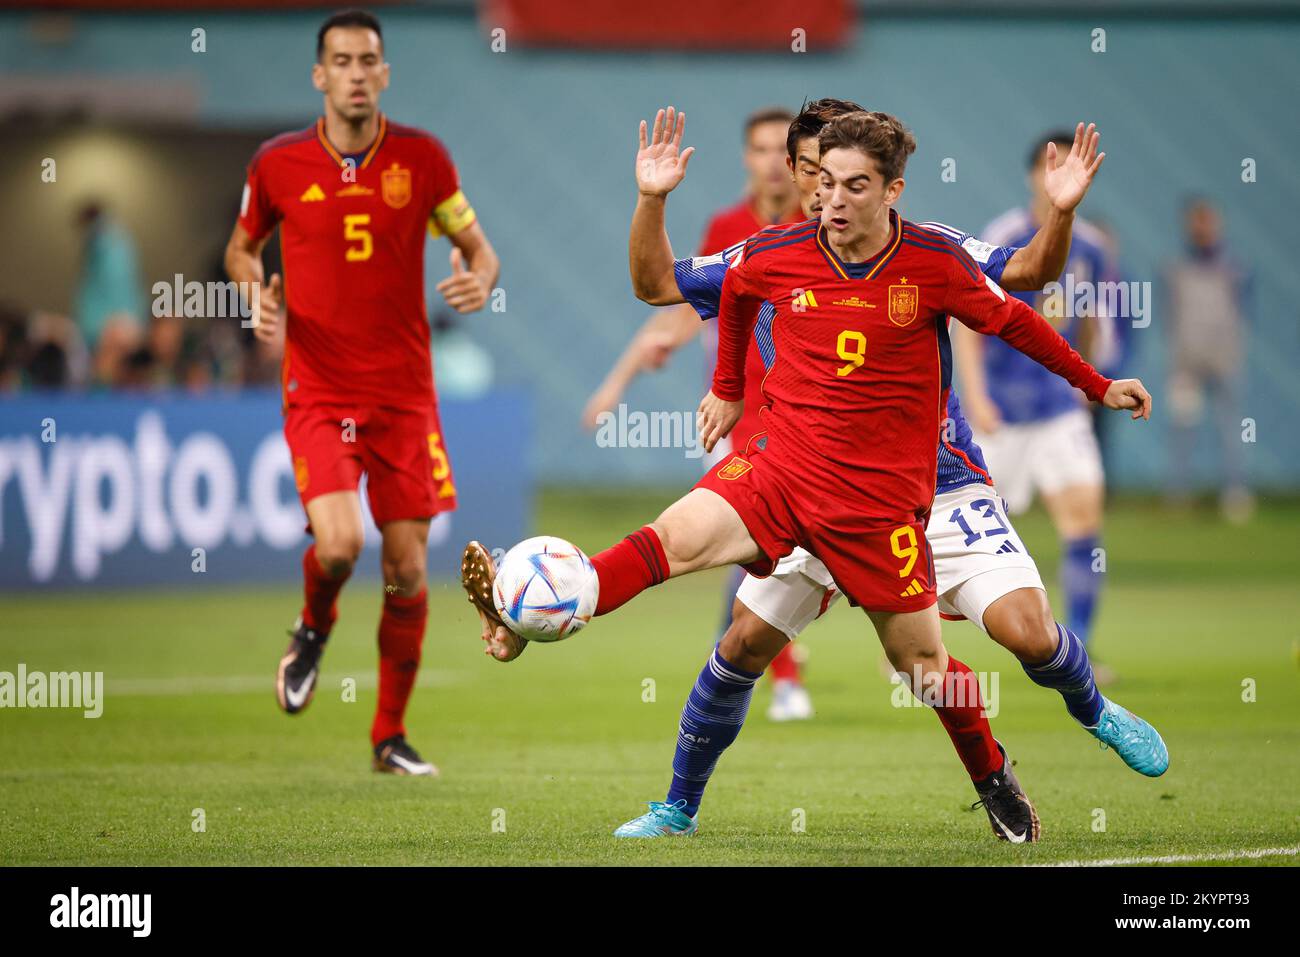 Doha, Catar. 01st Dec, 2022. GAVI of Spain and MORITA Hidemasa of Japan during a match between Japan and Spain, valid for the group stage of the World Cup, held at Khalifa International Stadium in Doha, Qatar. Credit: Rodolfo Buhrer/La Imagem/FotoArena/Alamy Live News Stock Photo